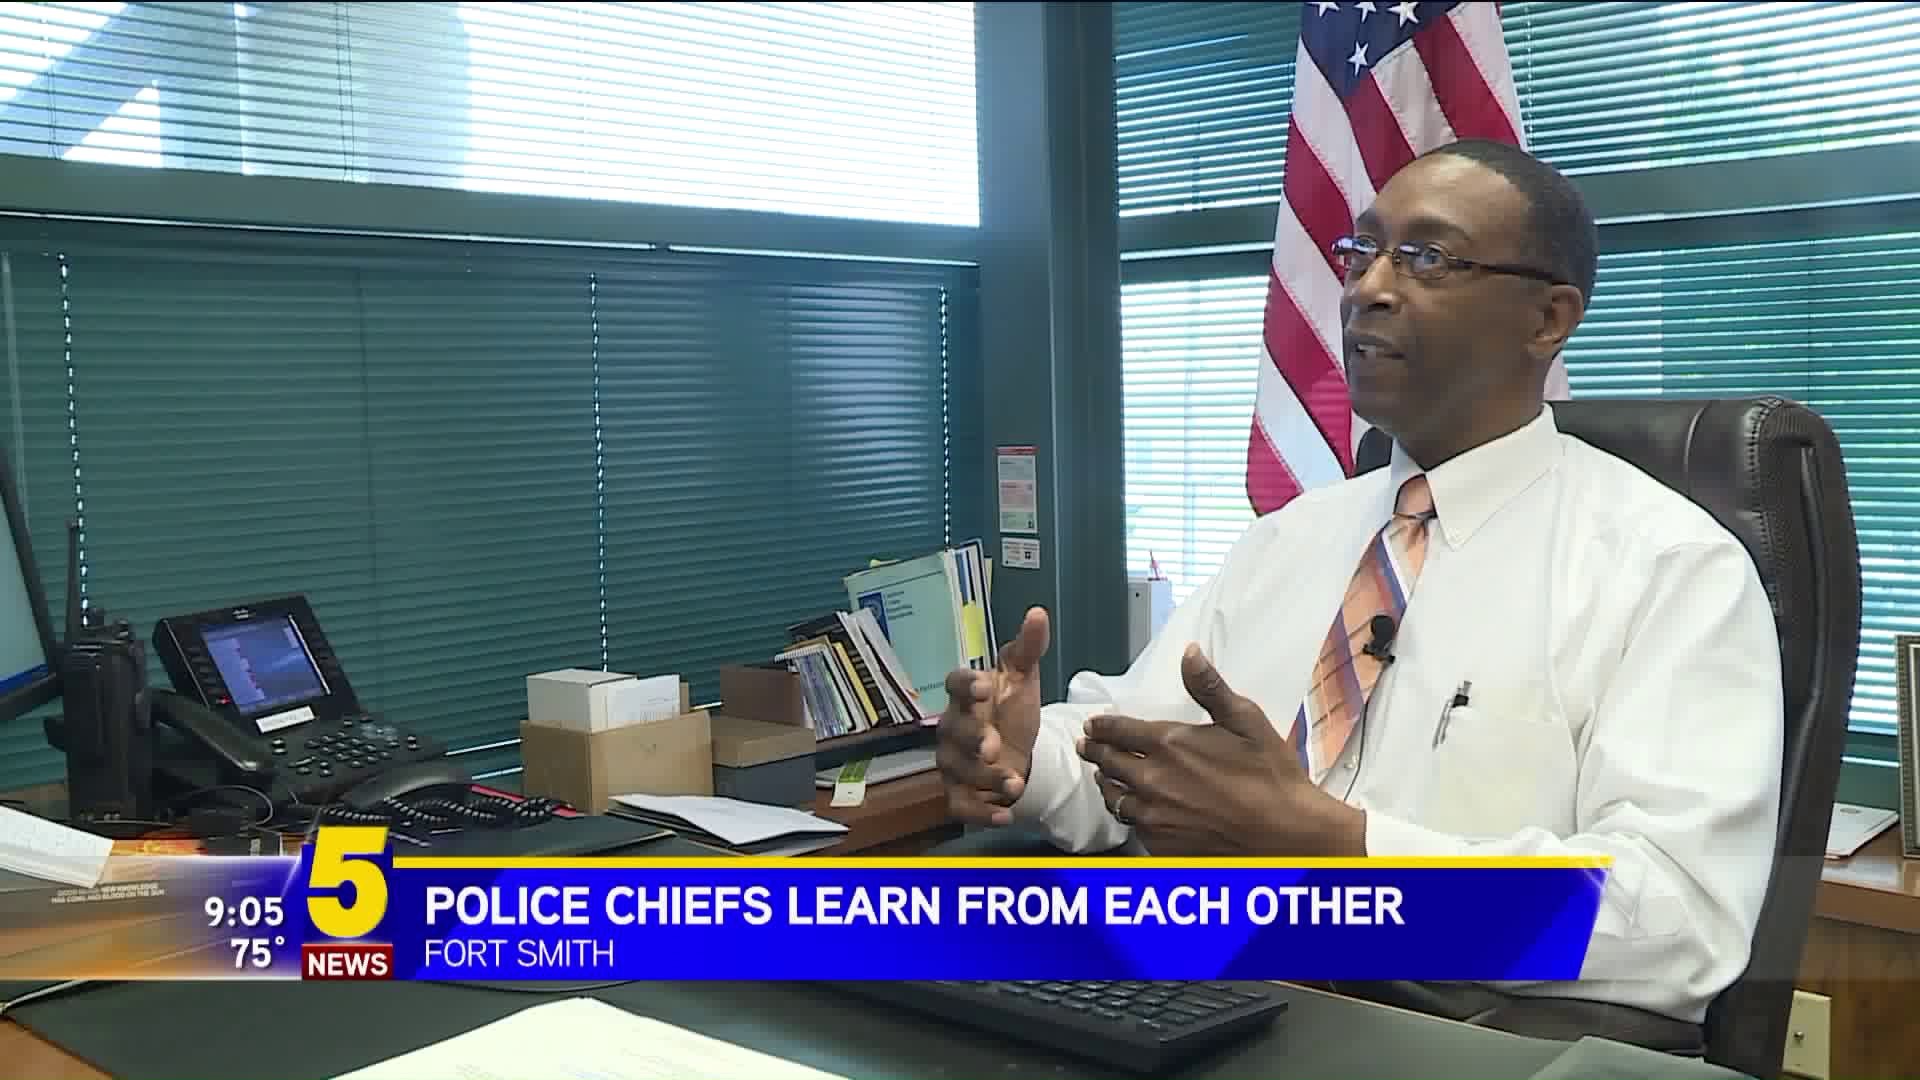 Police Chiefs Learn From Each Other